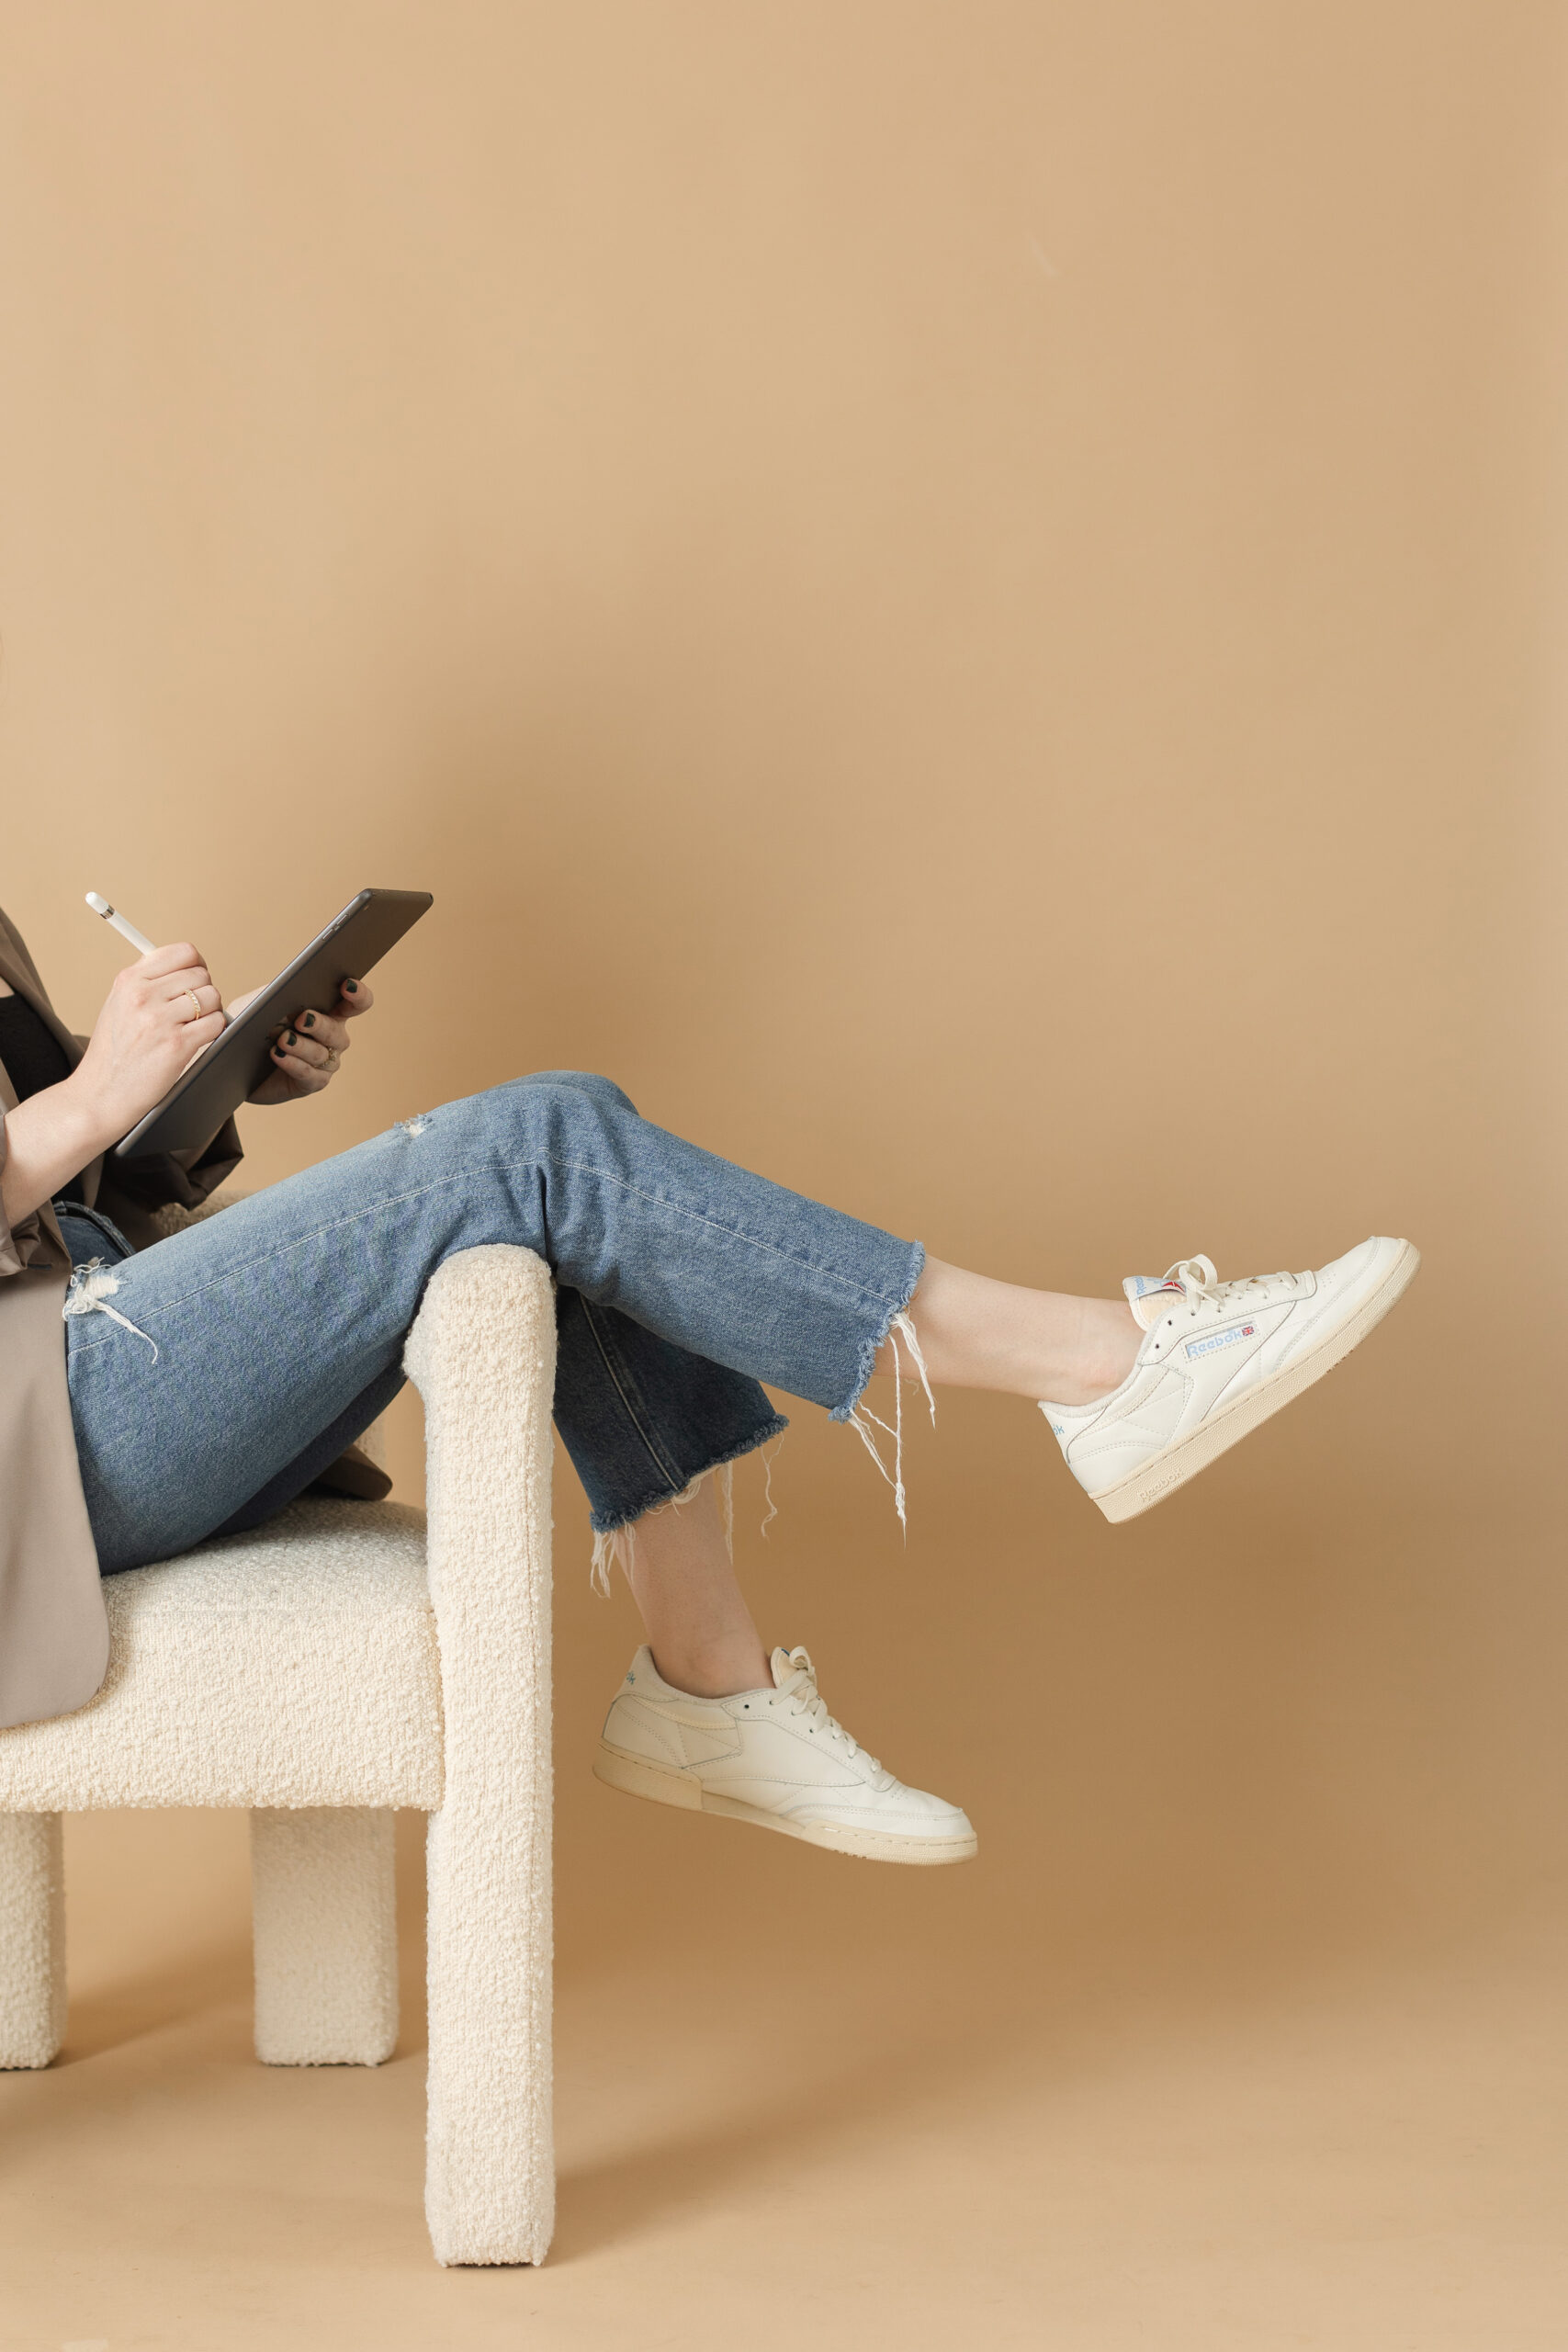 woman web designer sits, drawing on her ipad, with legs draped over the arm of a cool chair in ripped jeans and white sneakers. she seems really cool